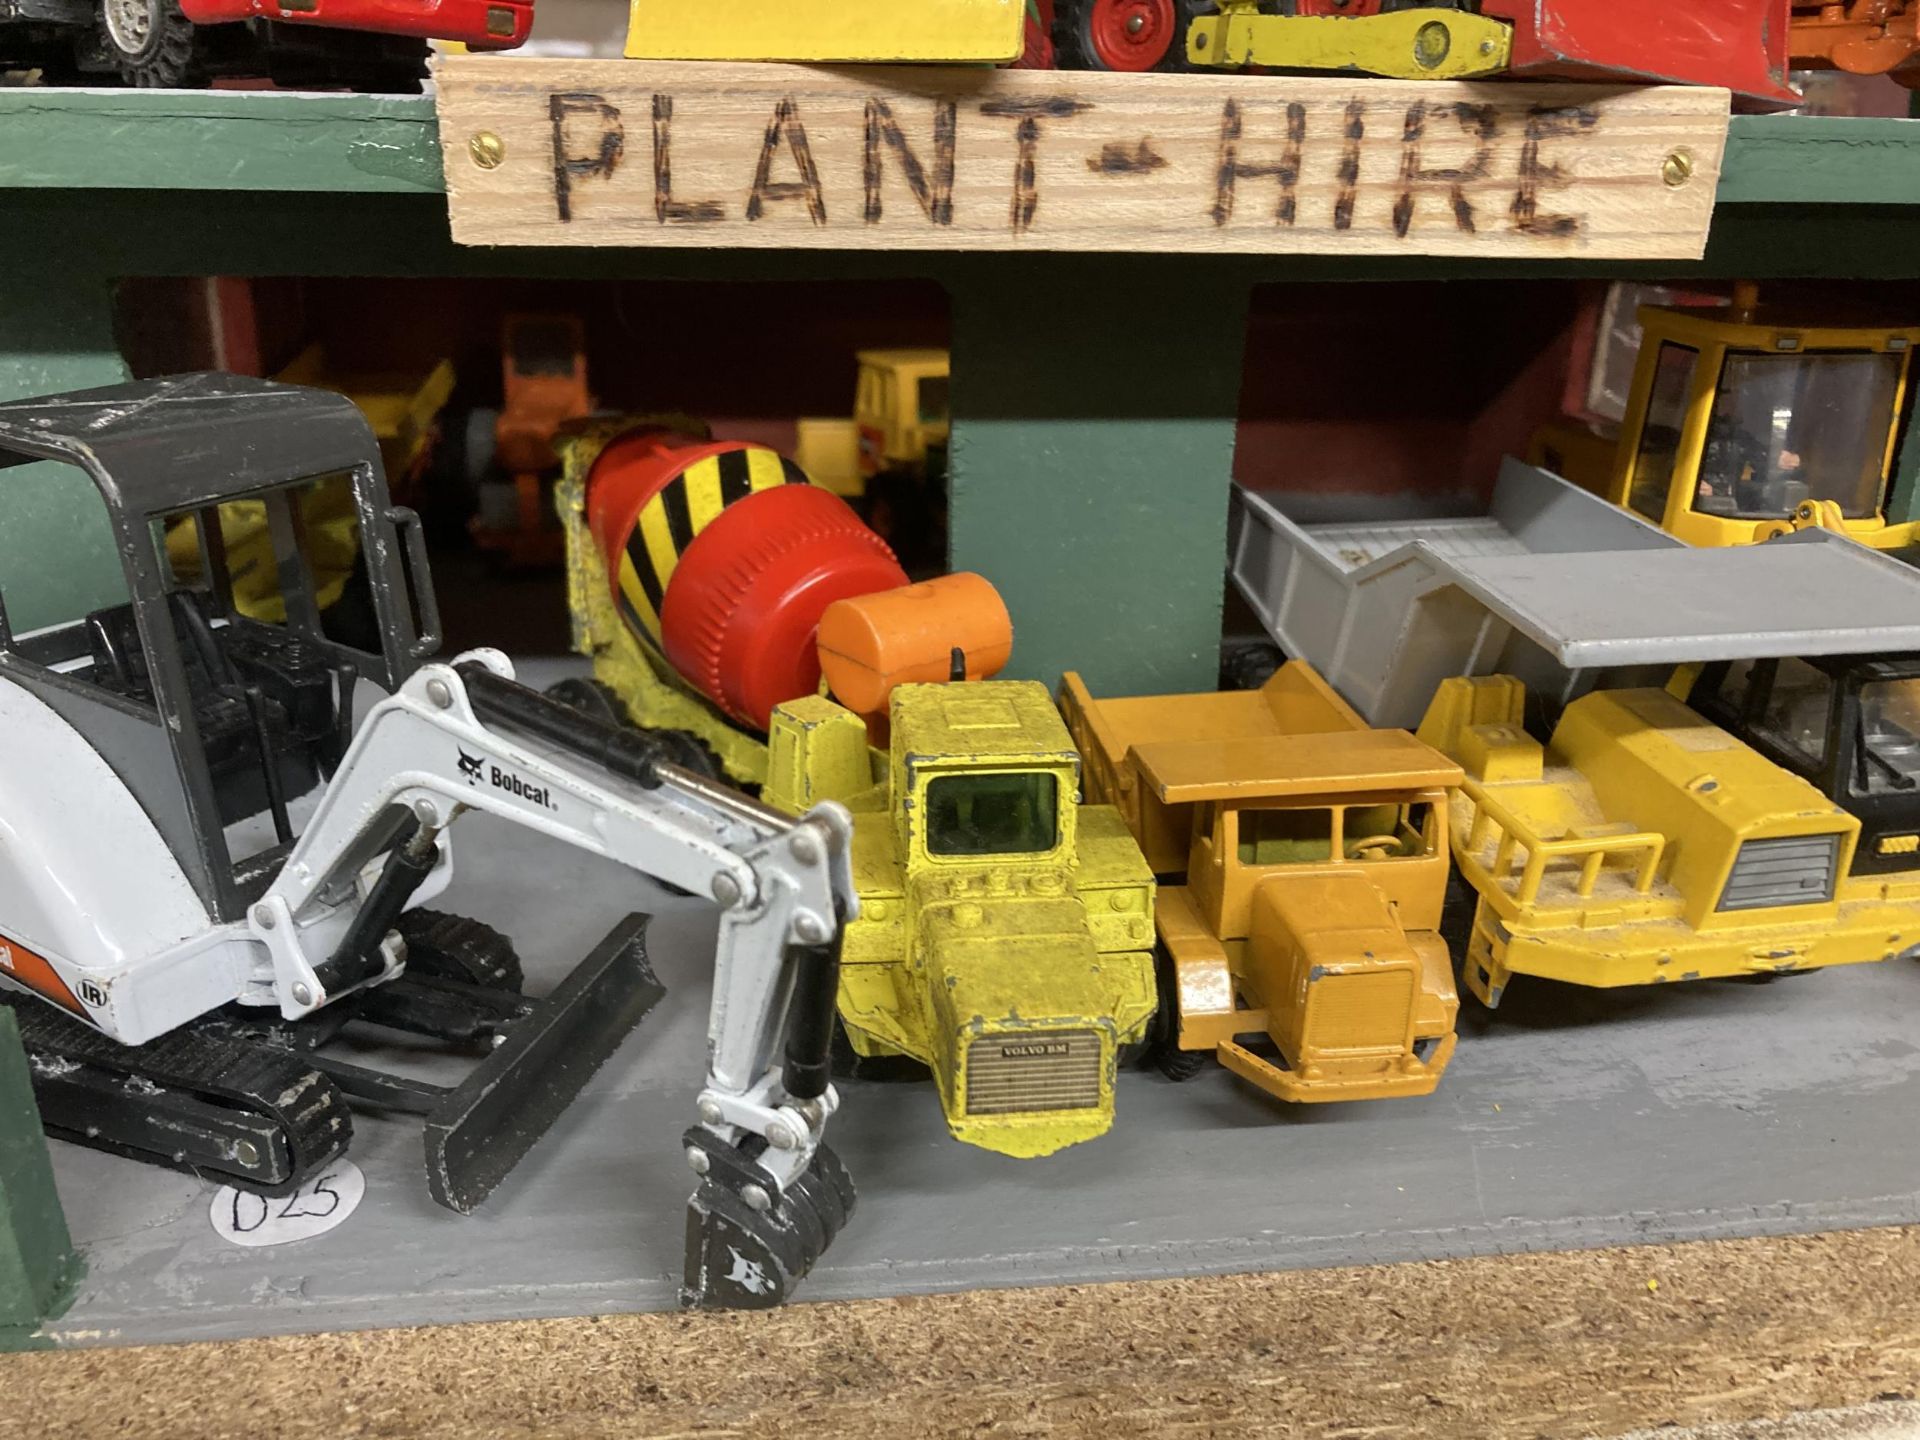 A PLANT HIRE GARAGE WITH TWELVE VARIOUS VEHICLES AND MACHINES - Image 3 of 4